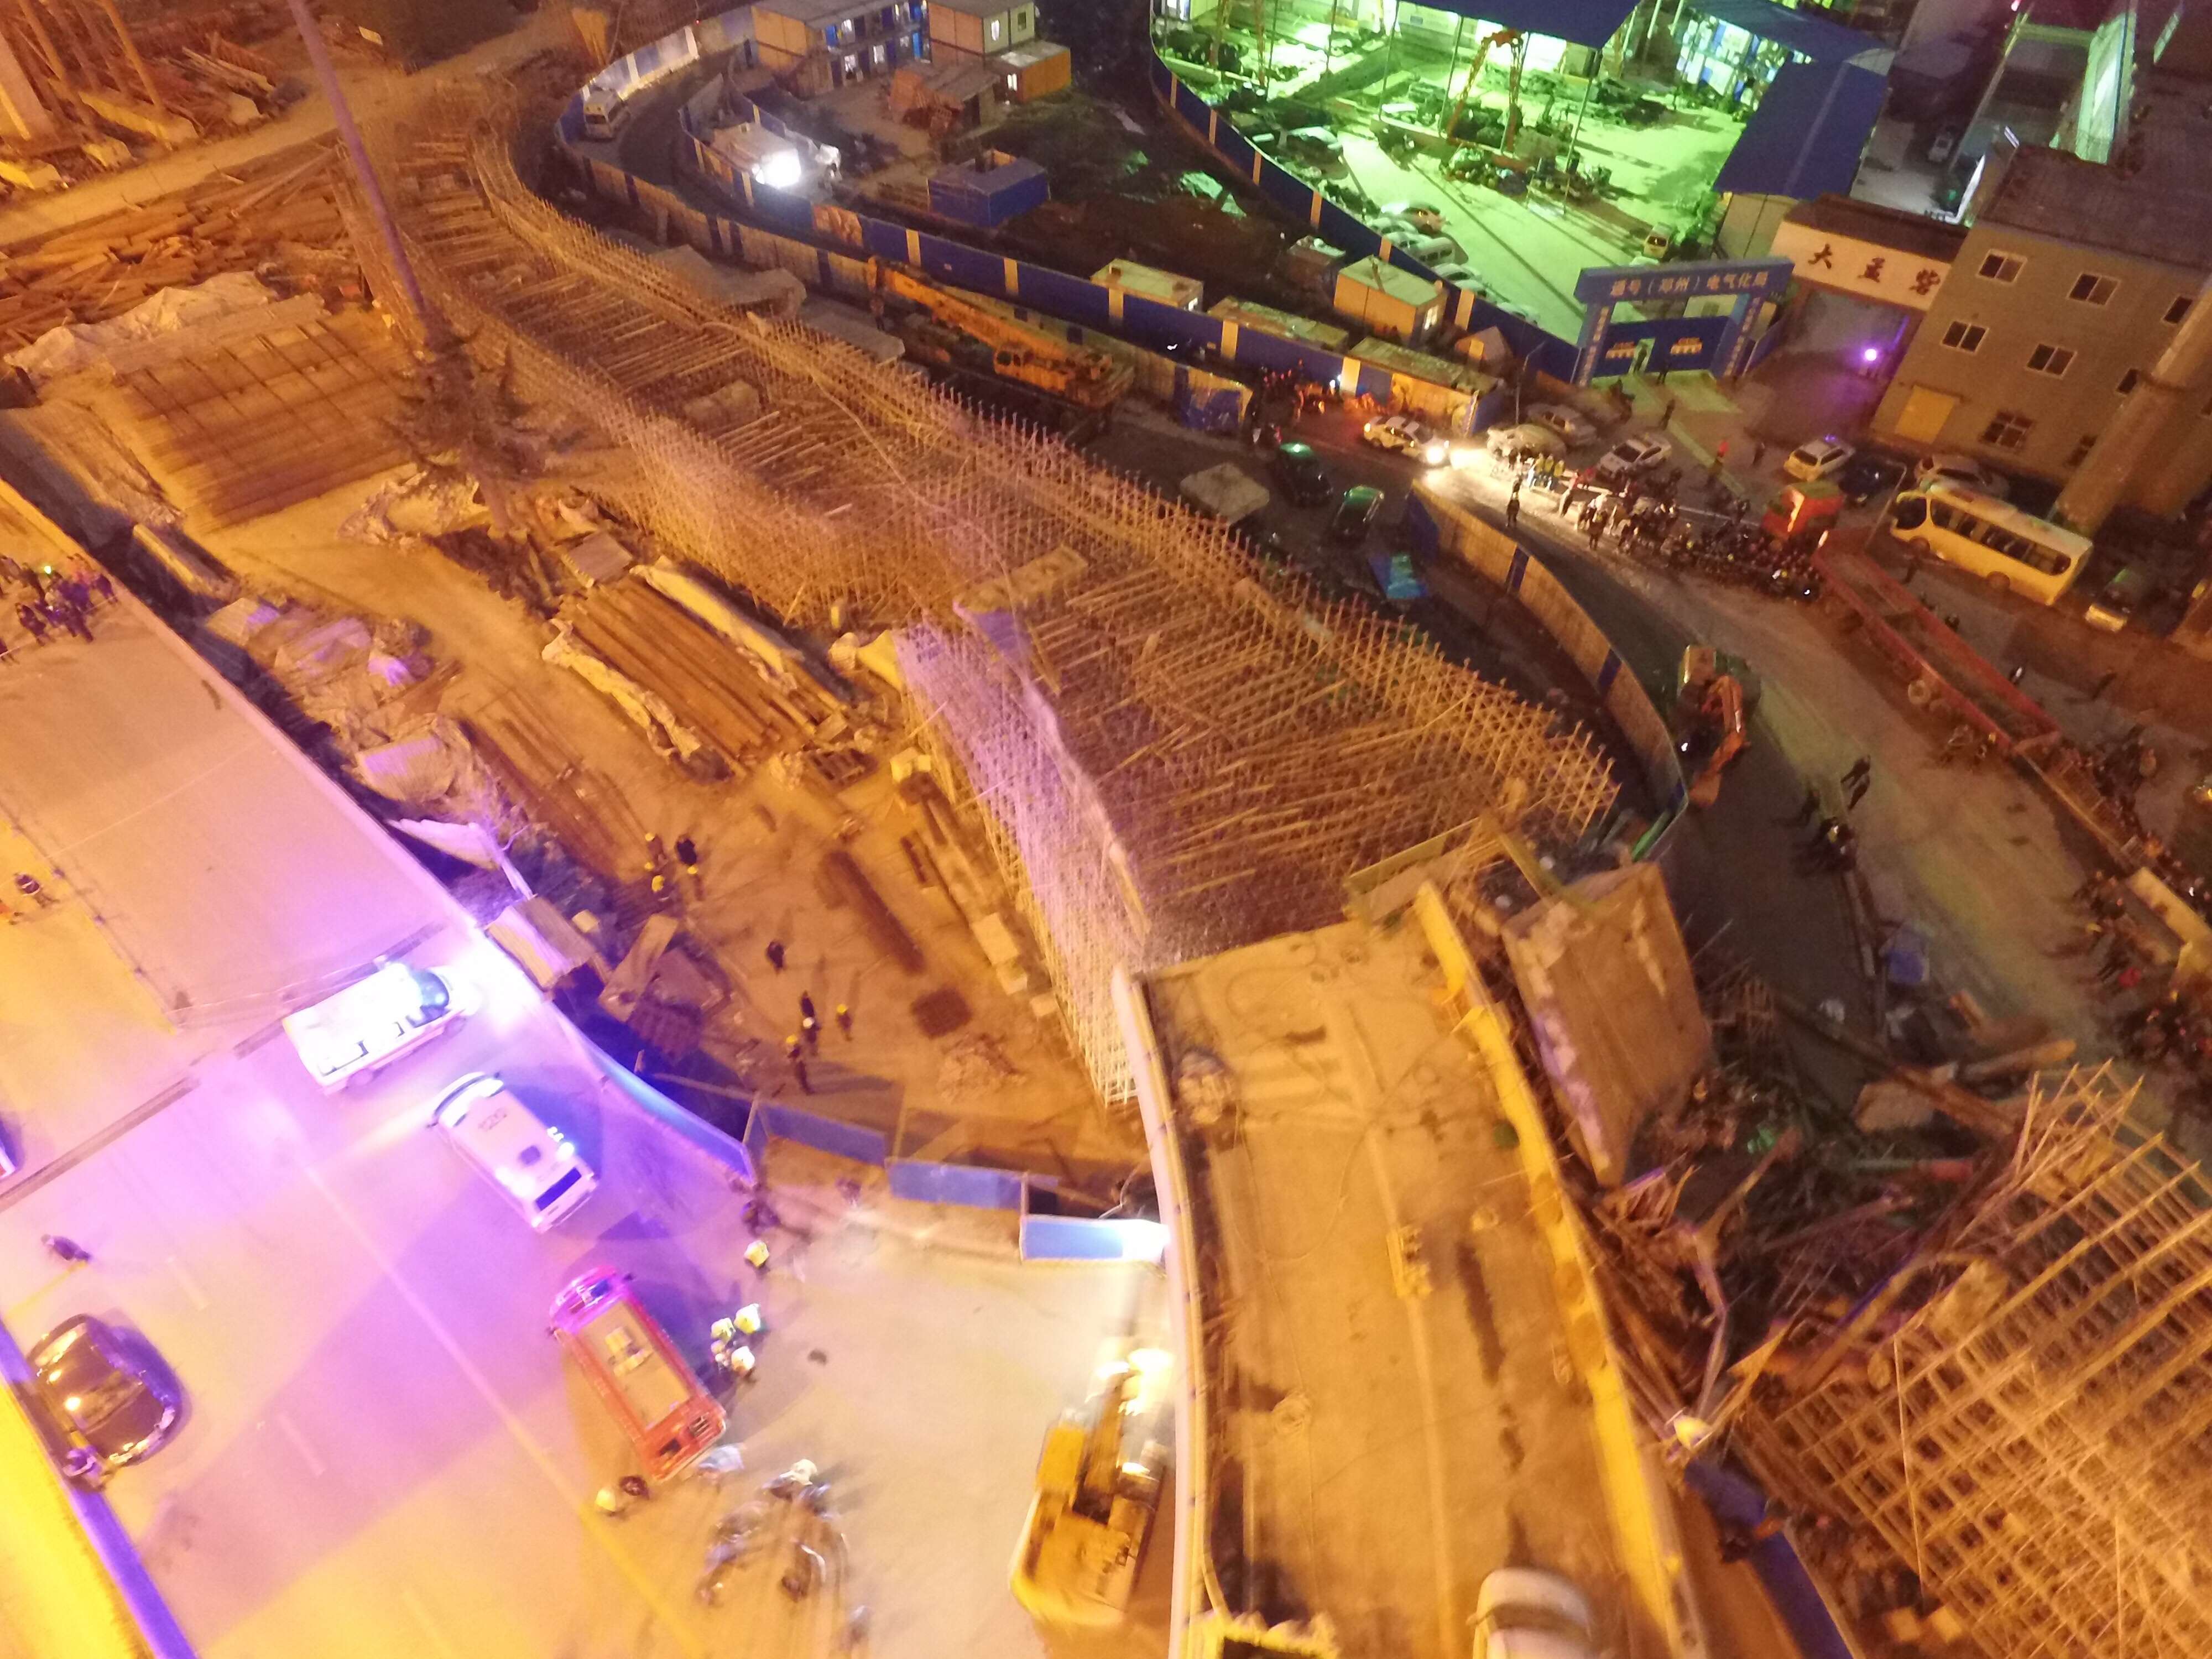 The accident scene after the viaduct collapsed at the intersection of two roads in Zhengzhou, capital city of Henan province, on Thursday. Photo: Xinhua